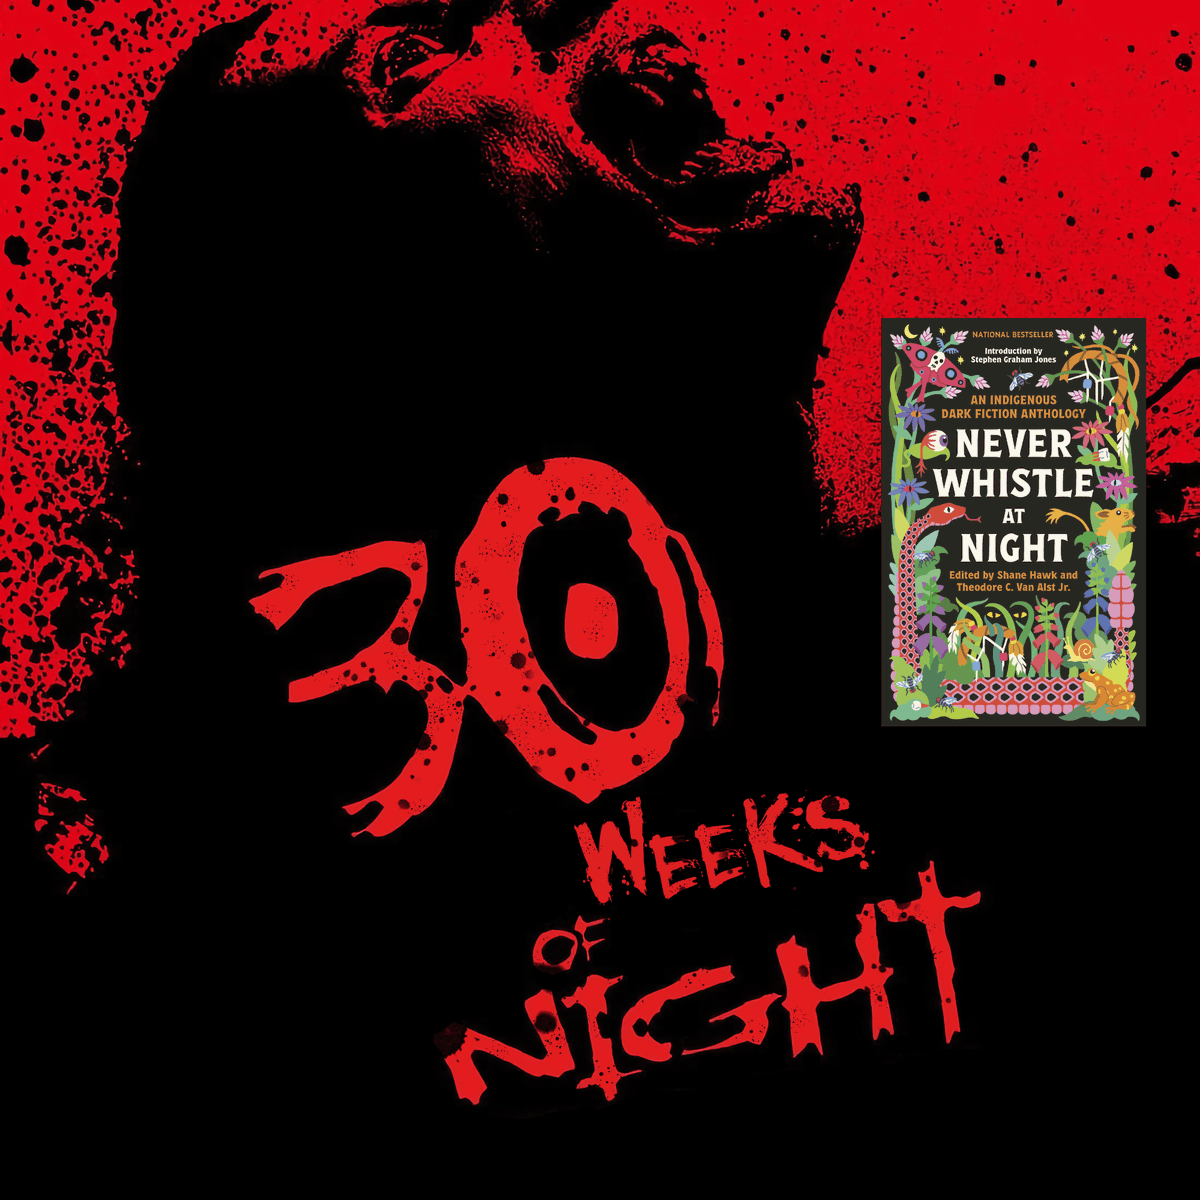 30 WEEKS OF NIGHT Never Whistle at Night has now been a national bestseller for 30 weeks in a row. We don't have words. Wow. It's overwhelming to witness the never-ending support from booksellers and readers! Thank you so much. NeverWhistleAtNight.com